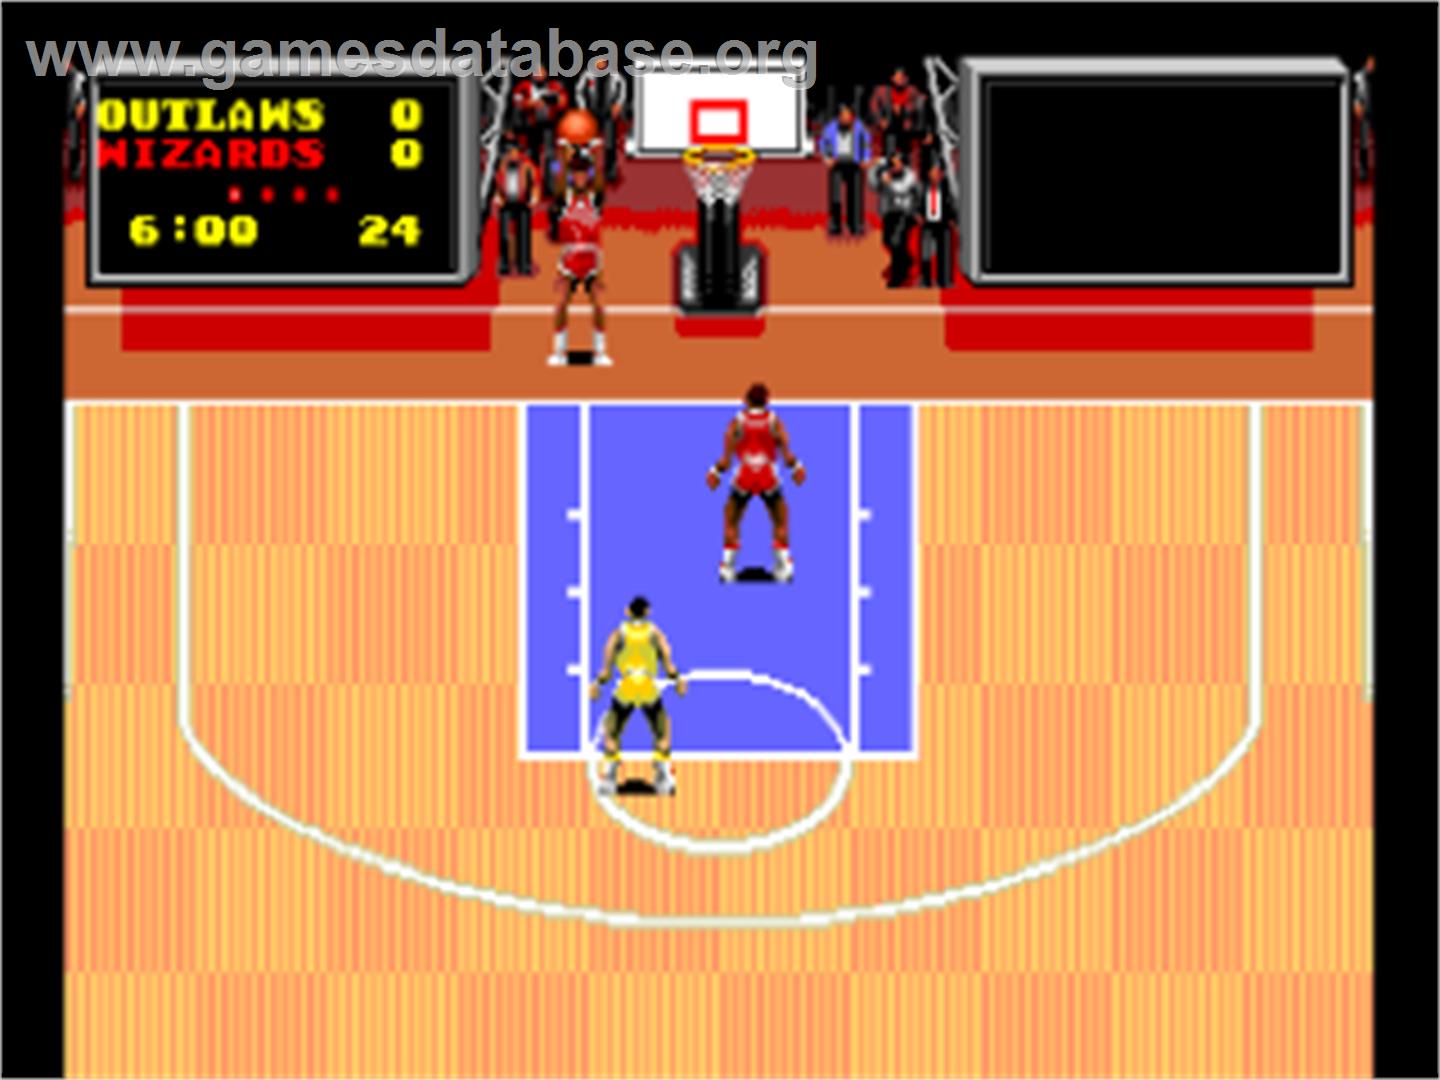 TV Sports: Basketball - NEC PC Engine - Artwork - In Game